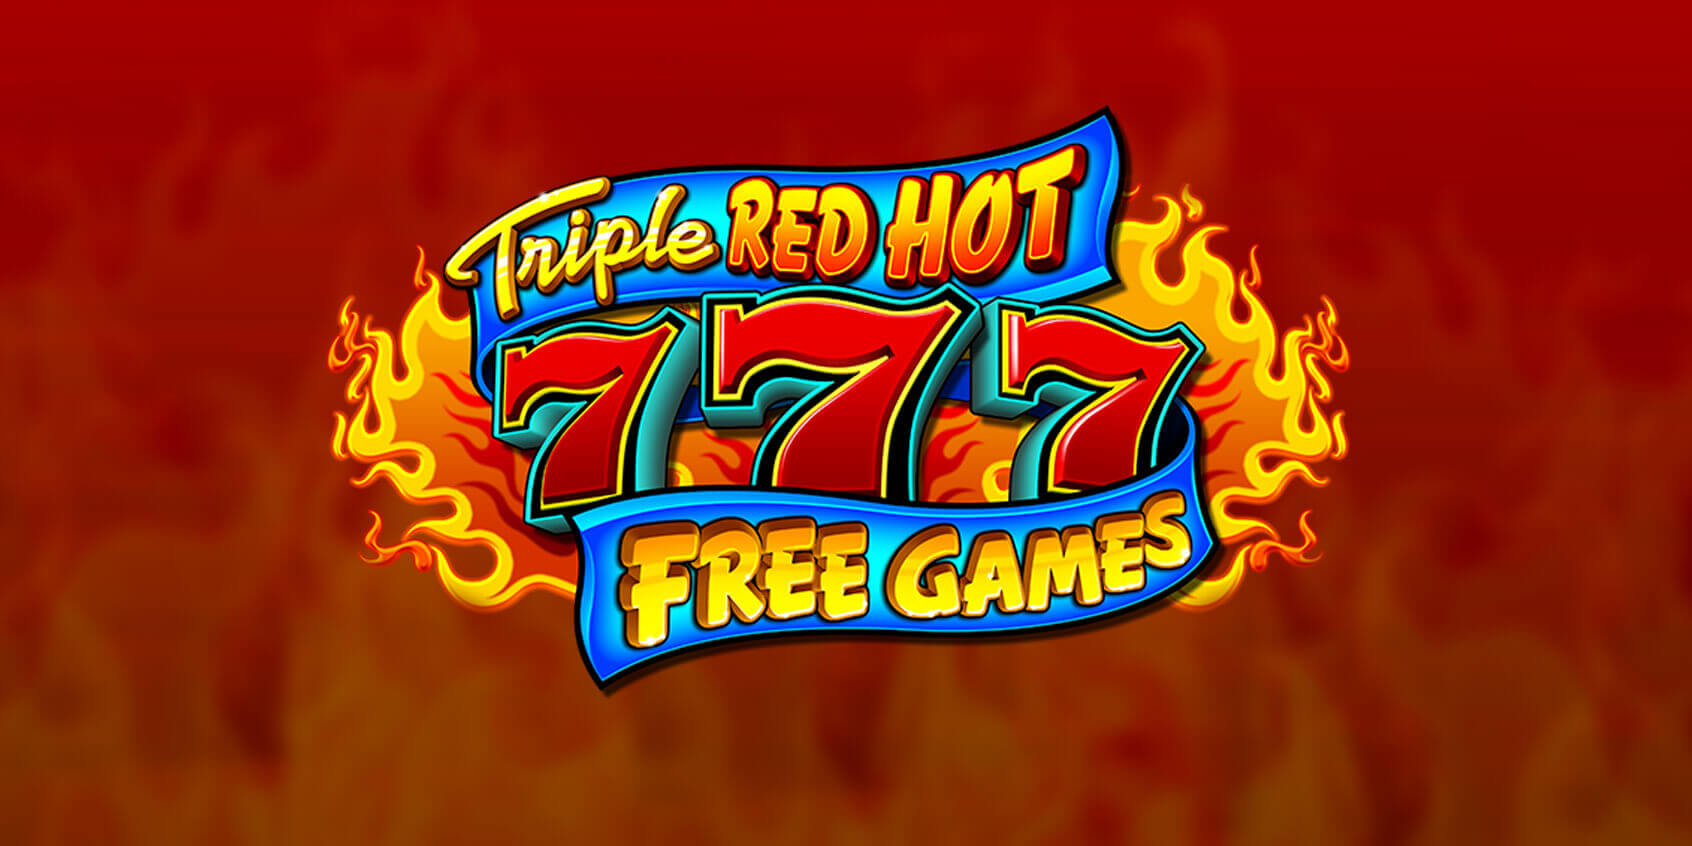 Triple Red Hot 7s Free Games Slot